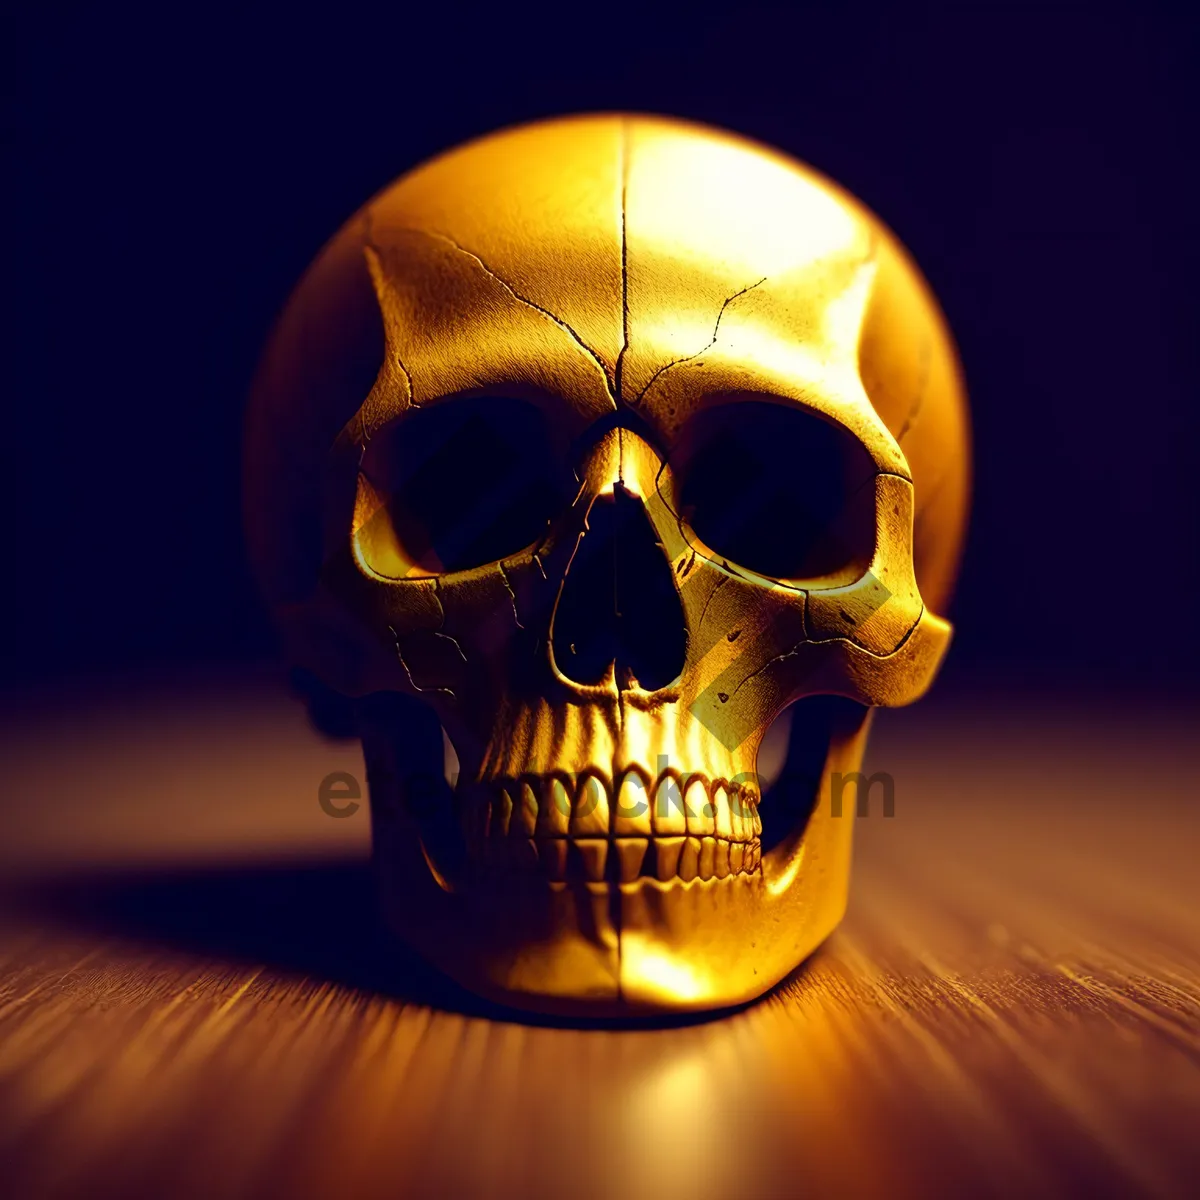 Picture of Spooky Pirate Skeleton with Frightening Expression